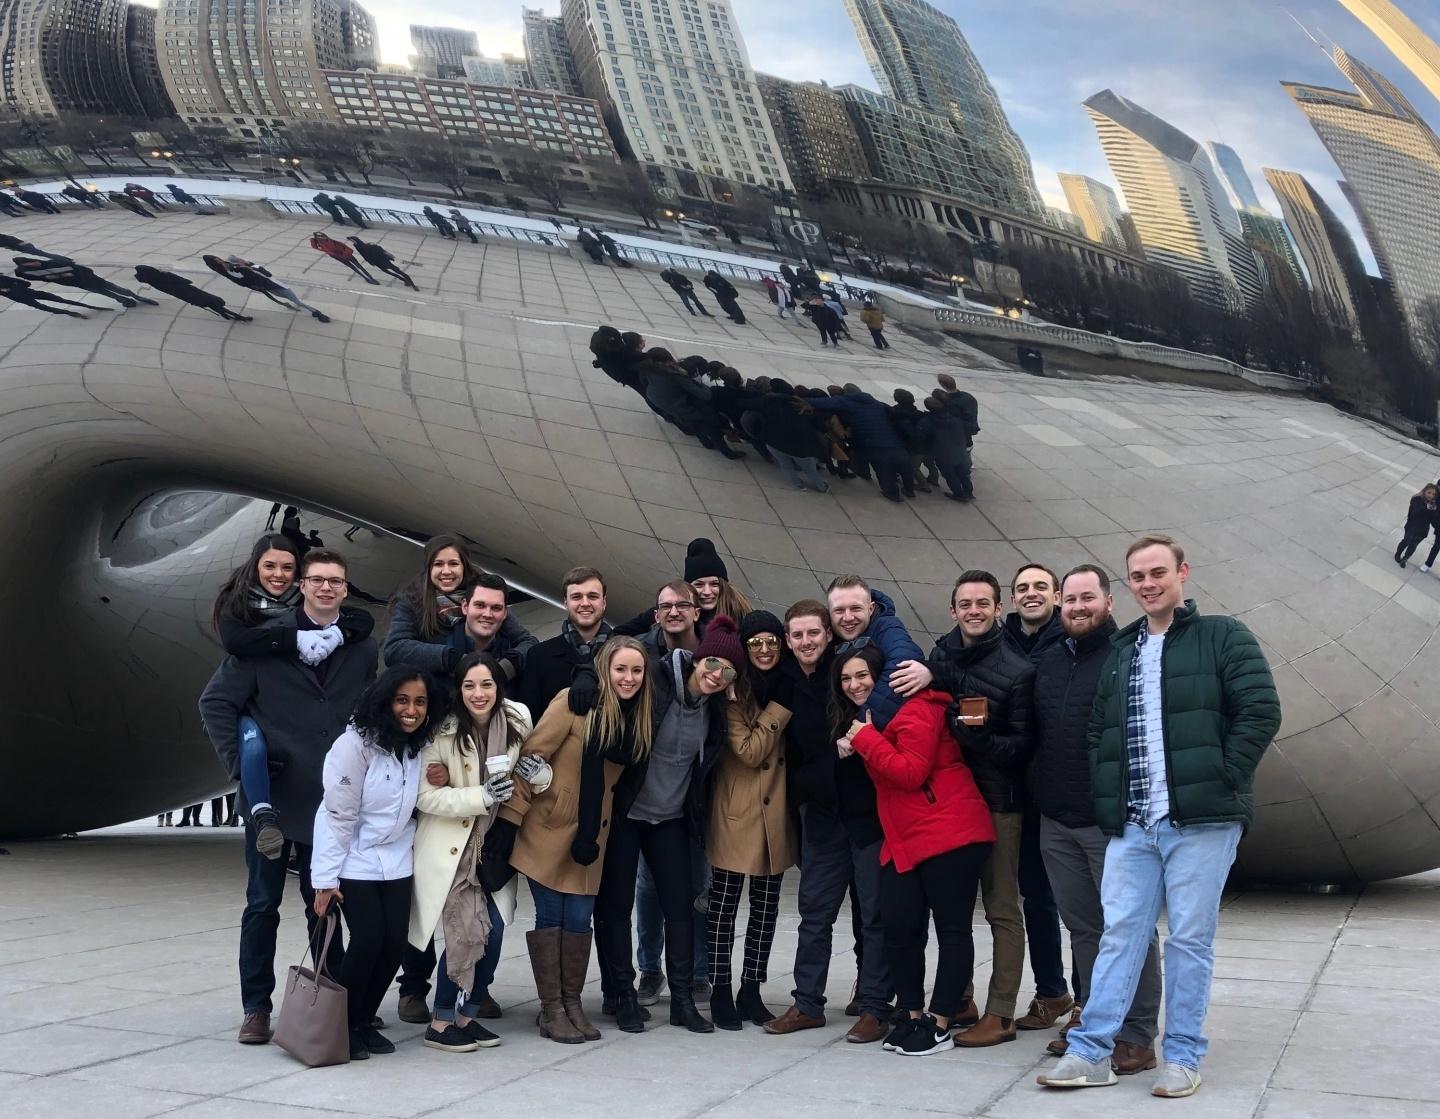 Students pose in front of the Chicago "Bean" while traveling for the ACHE Congress